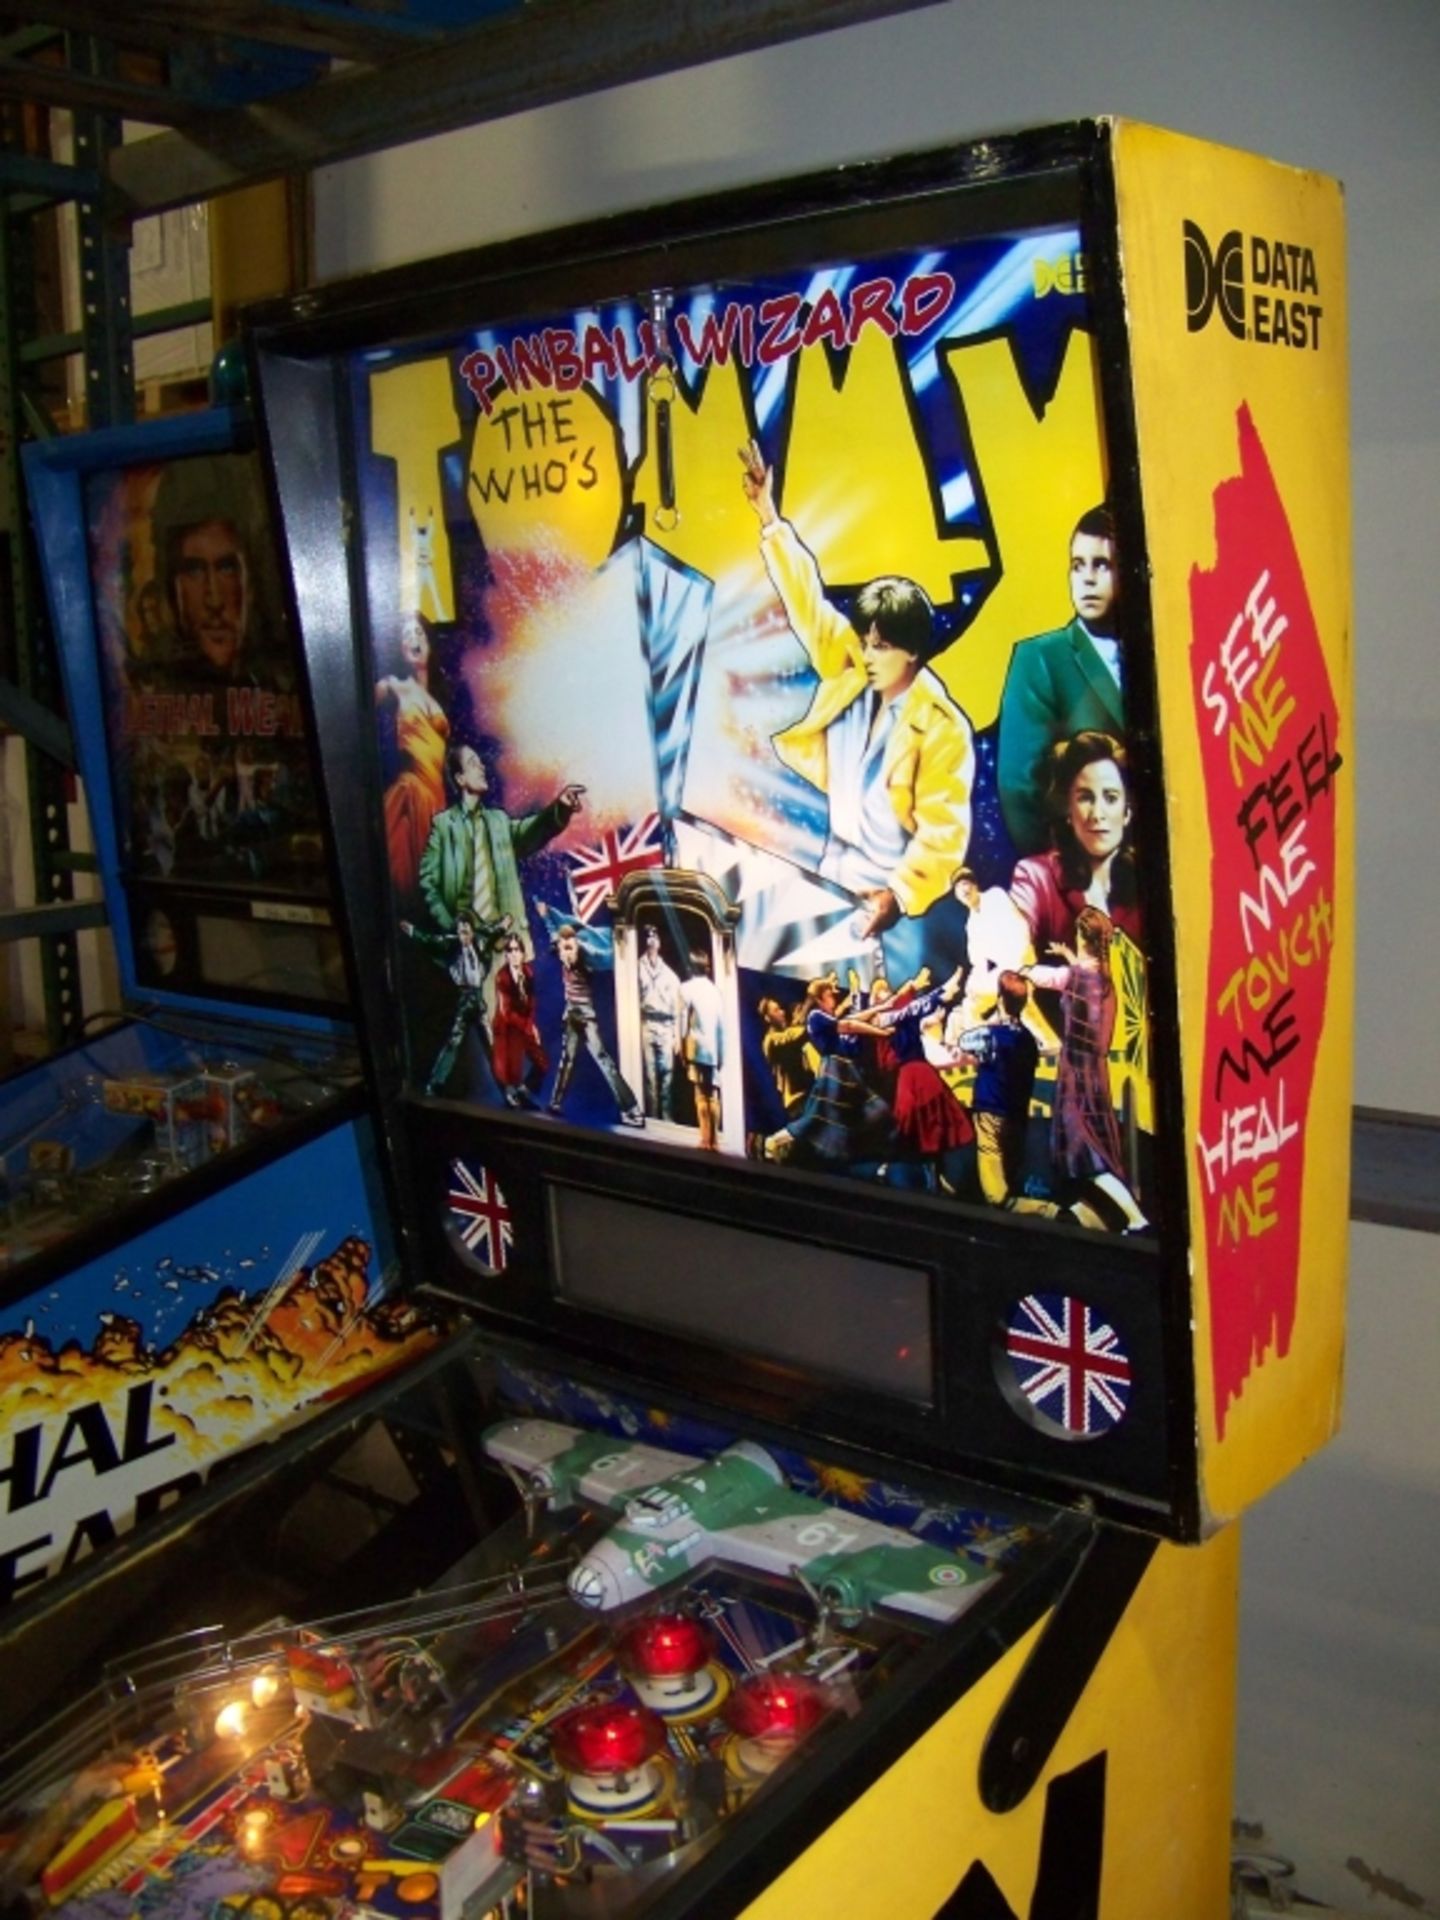 PINBALL WIZARD TOMMY THE WHO 1994 DATA EAST - Image 4 of 9